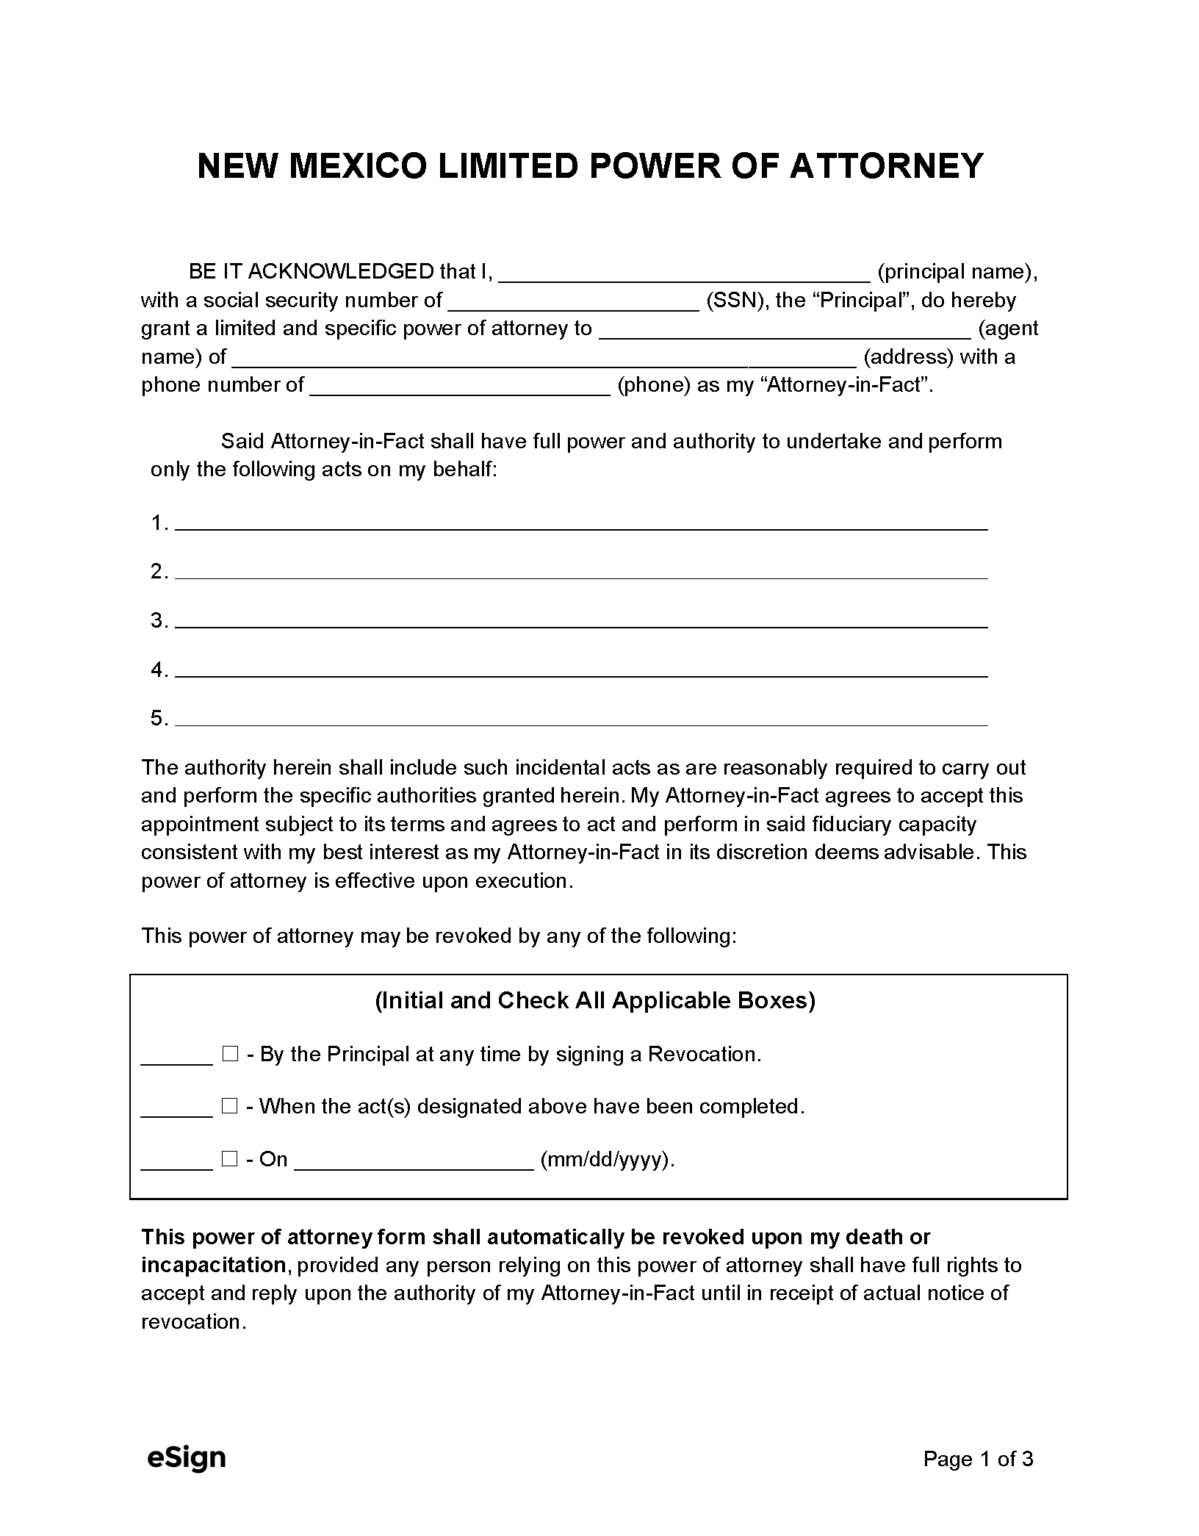 free-new-mexico-power-of-attorney-forms-pdf-word